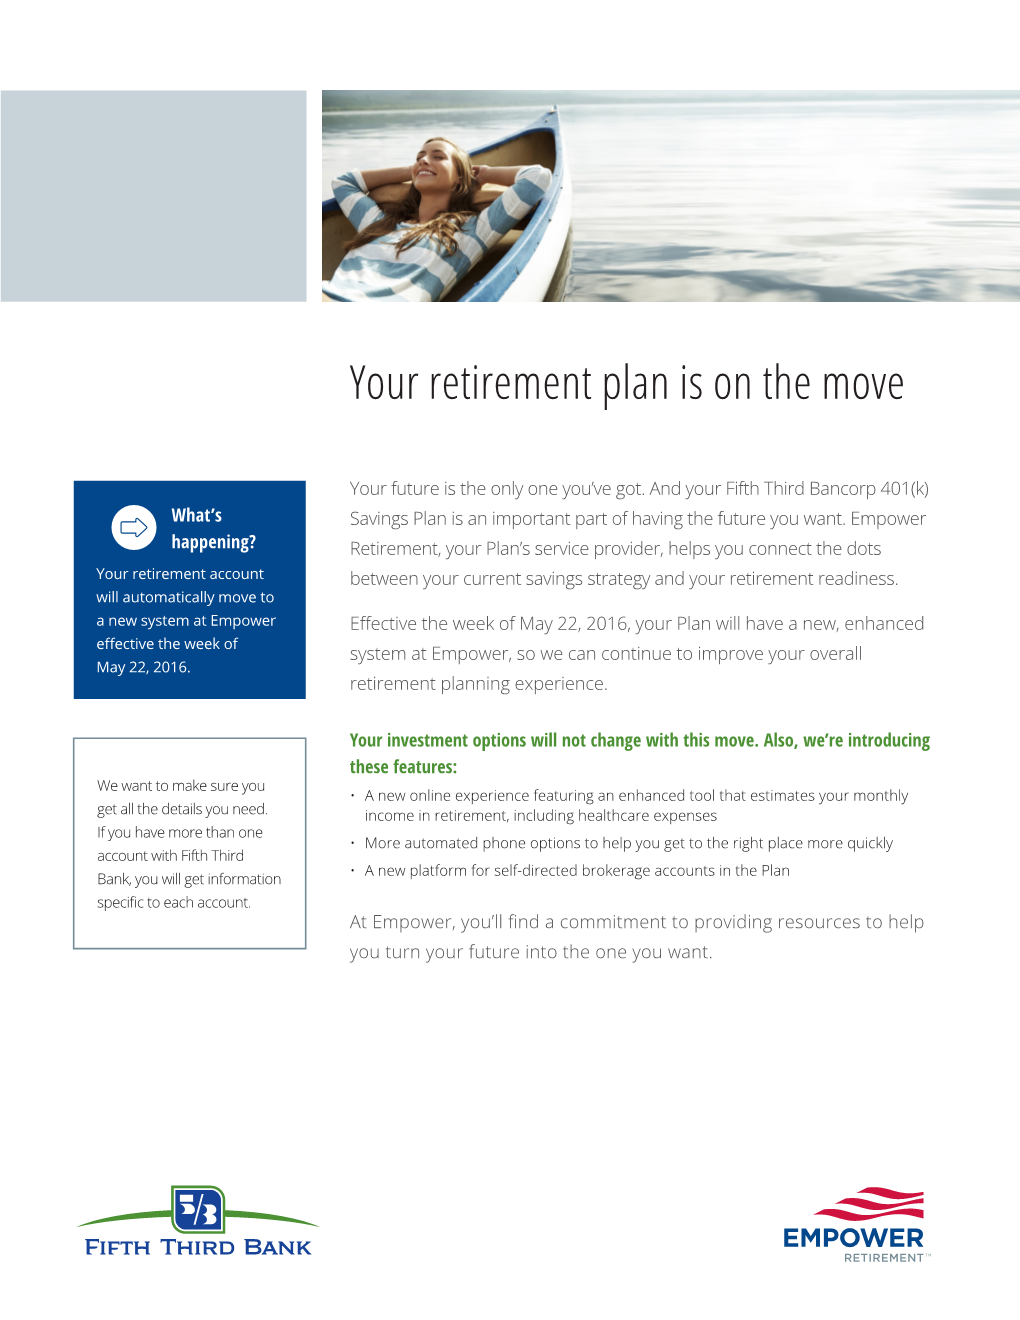 Your Retirement Plan Is on the Move